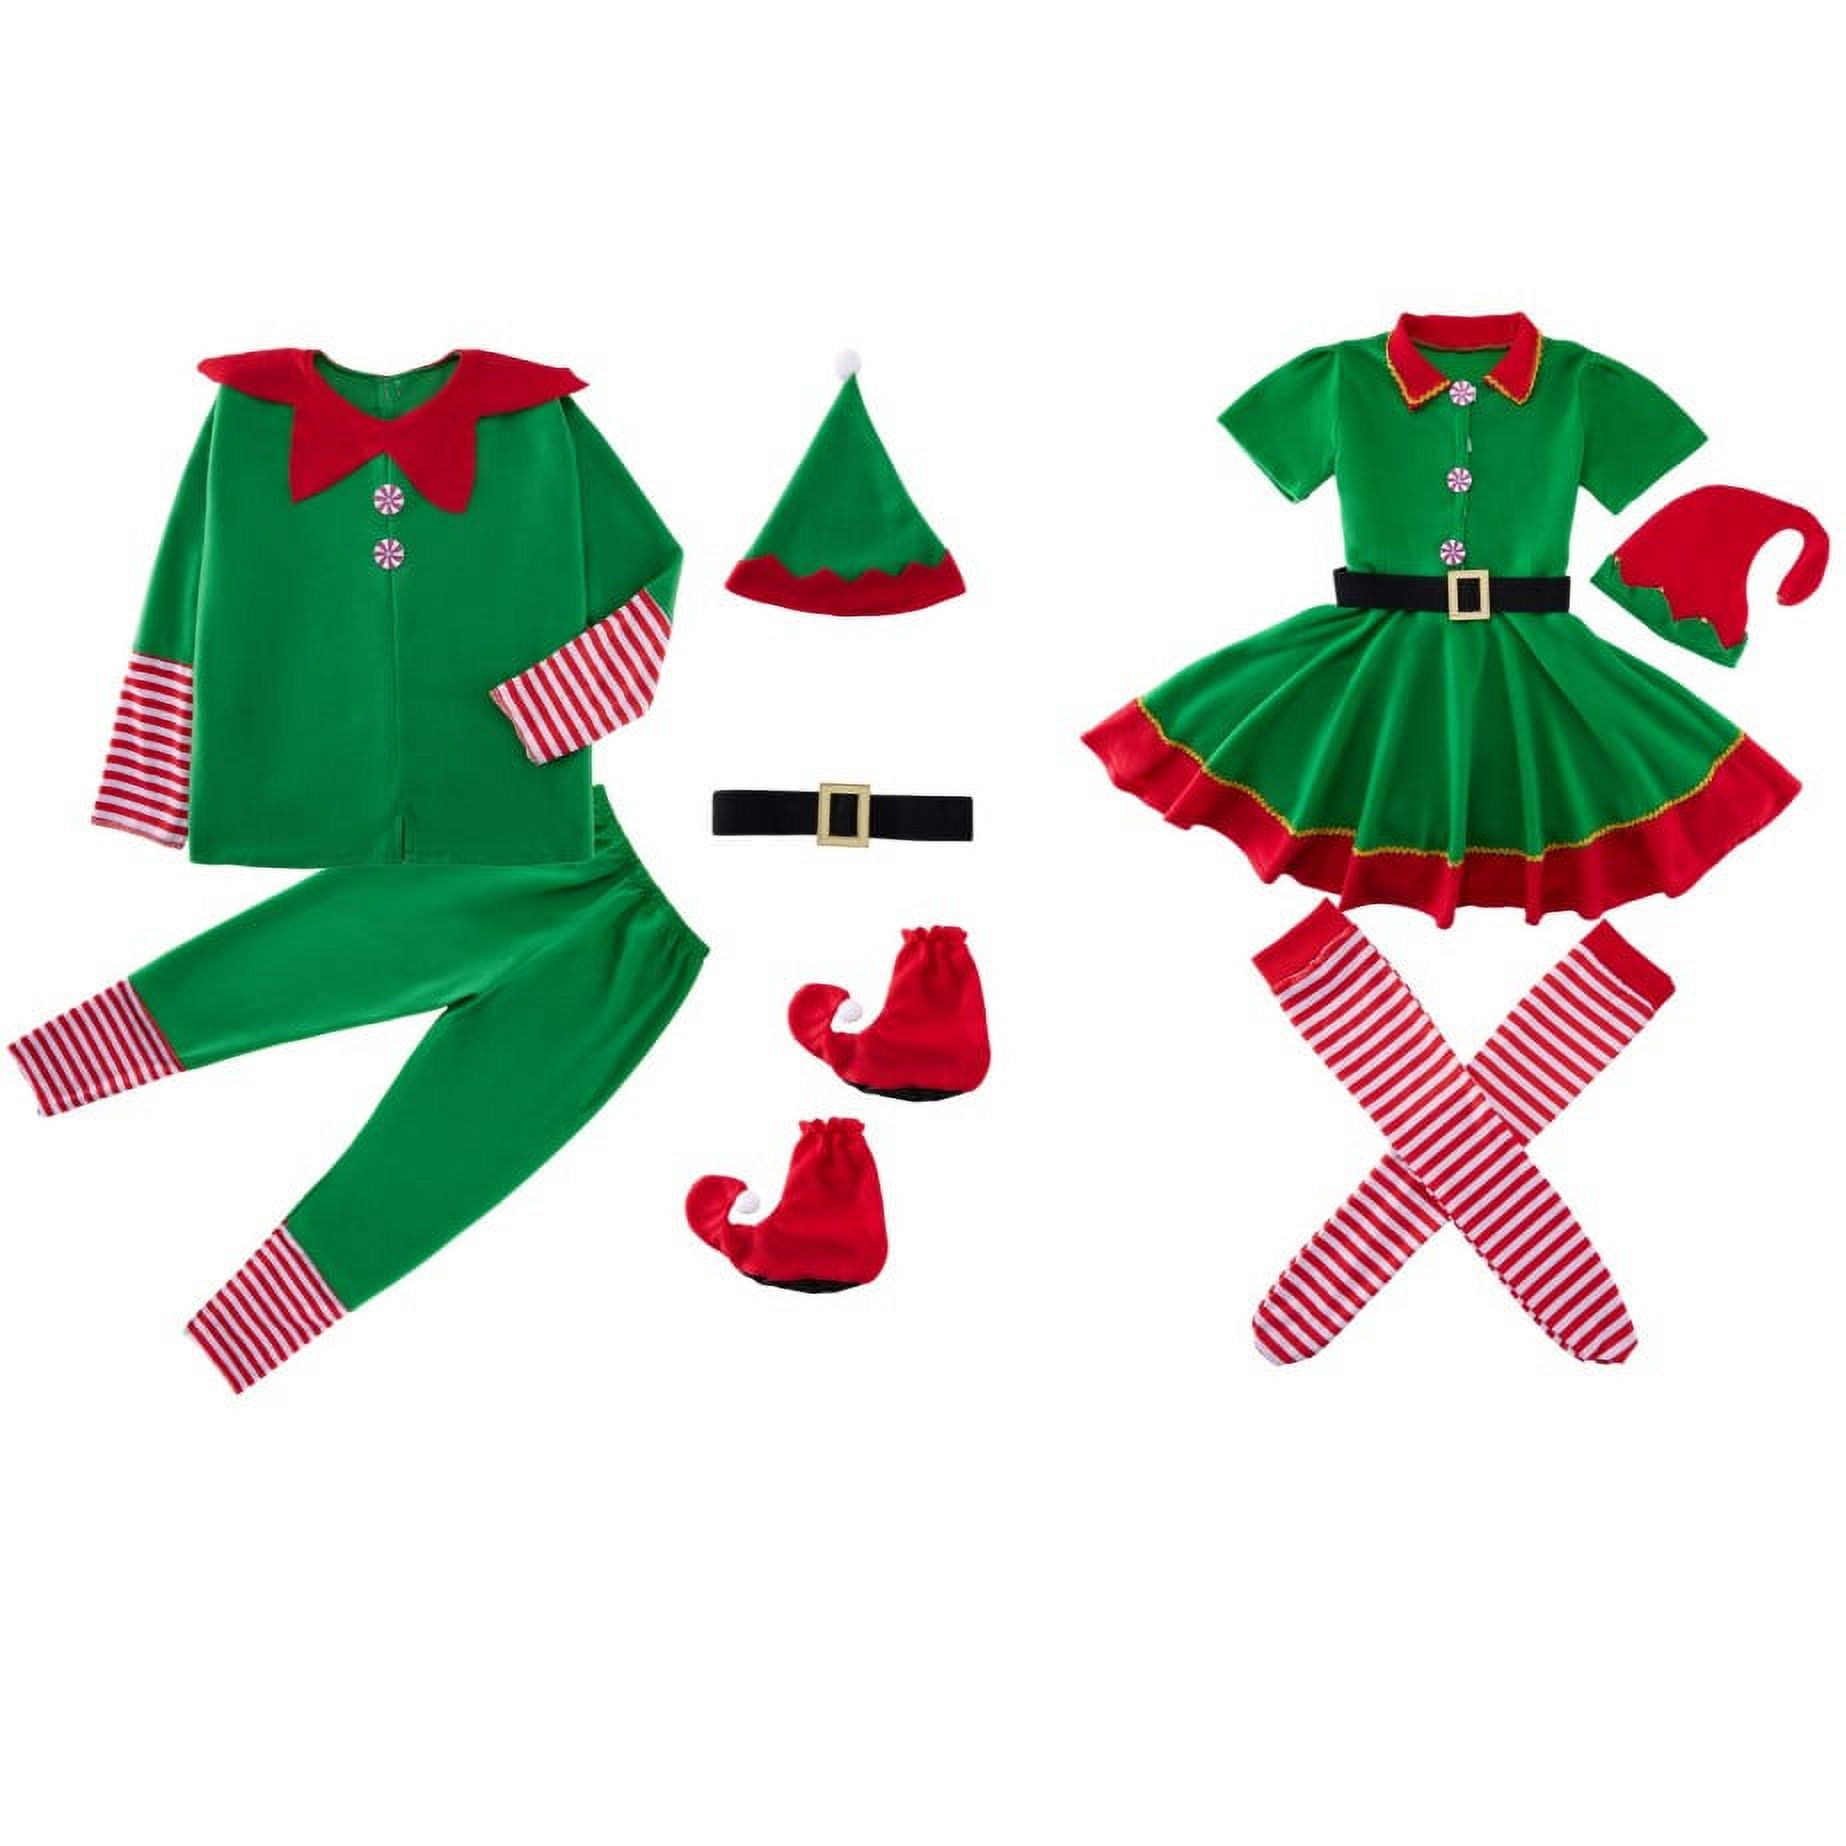 Family Matching Baby Chidren Adult Male Christmas Elf Costume - 5 Piece Set Includes Coat+Hat+Belt+Pants+Shoes Xmas Cosplay Suit - image 1 of 8